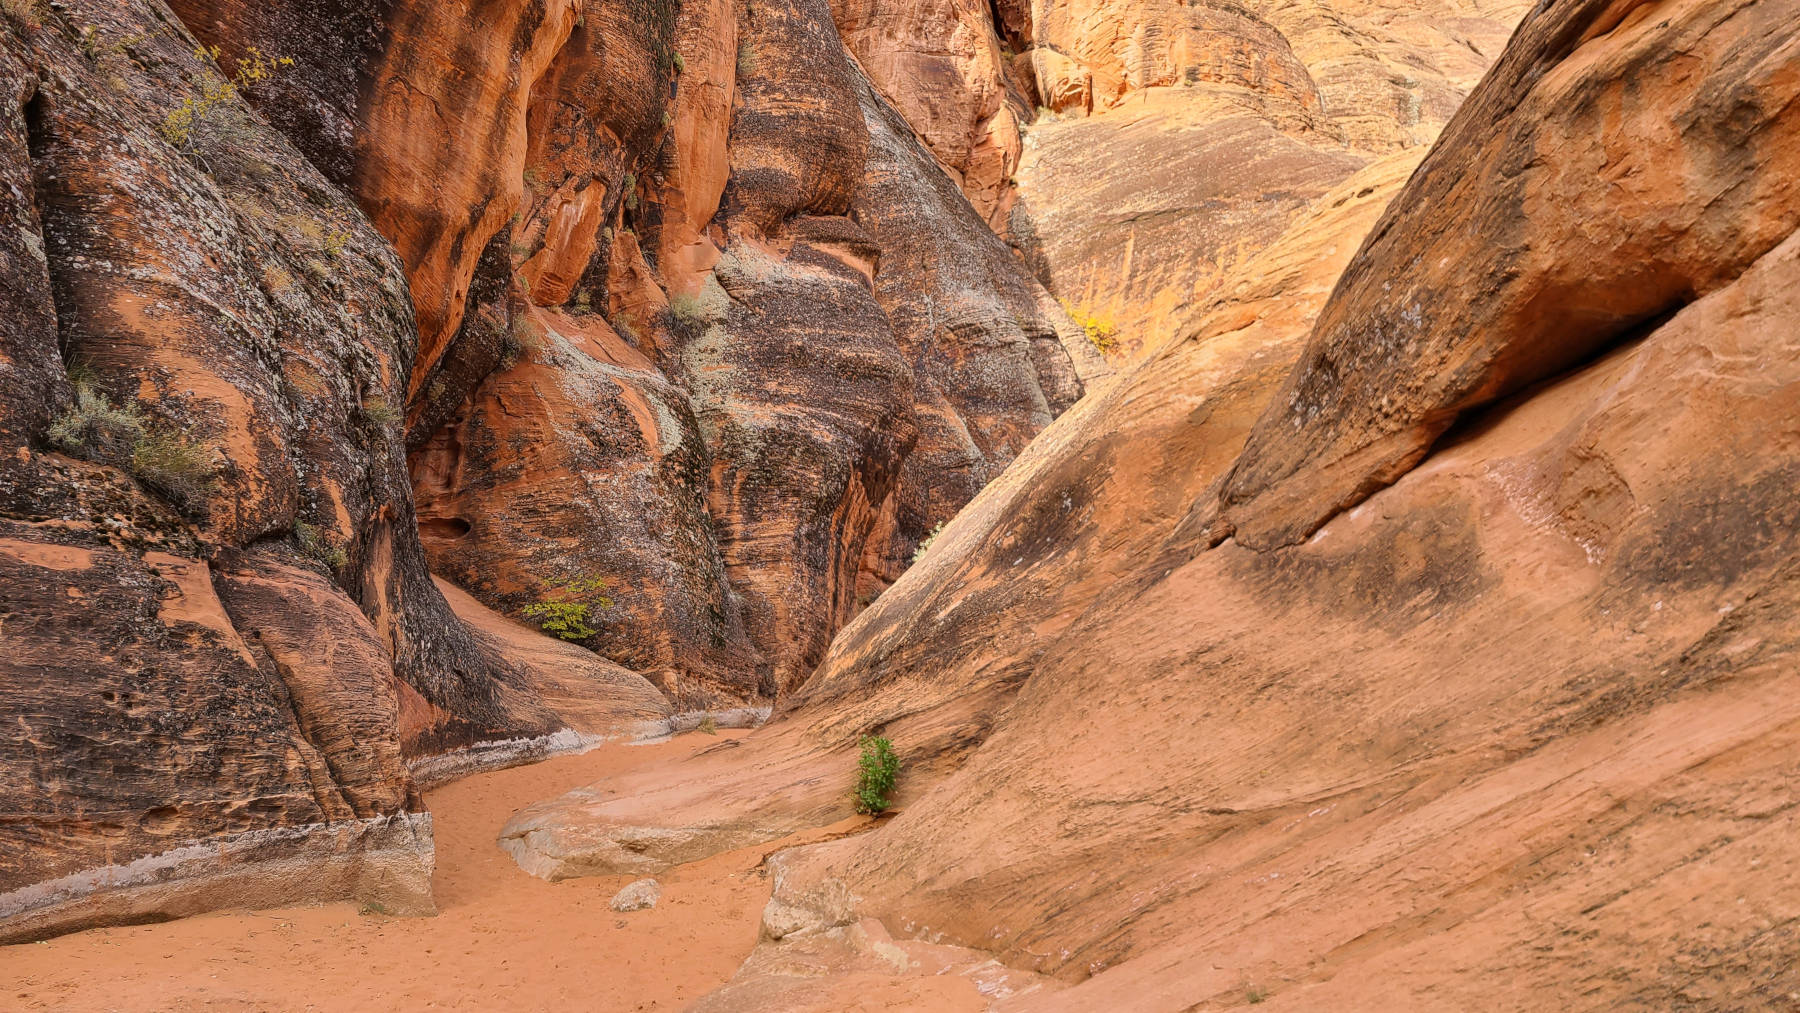 Don't forget your hydration when hiking through Utah's red rock canyons